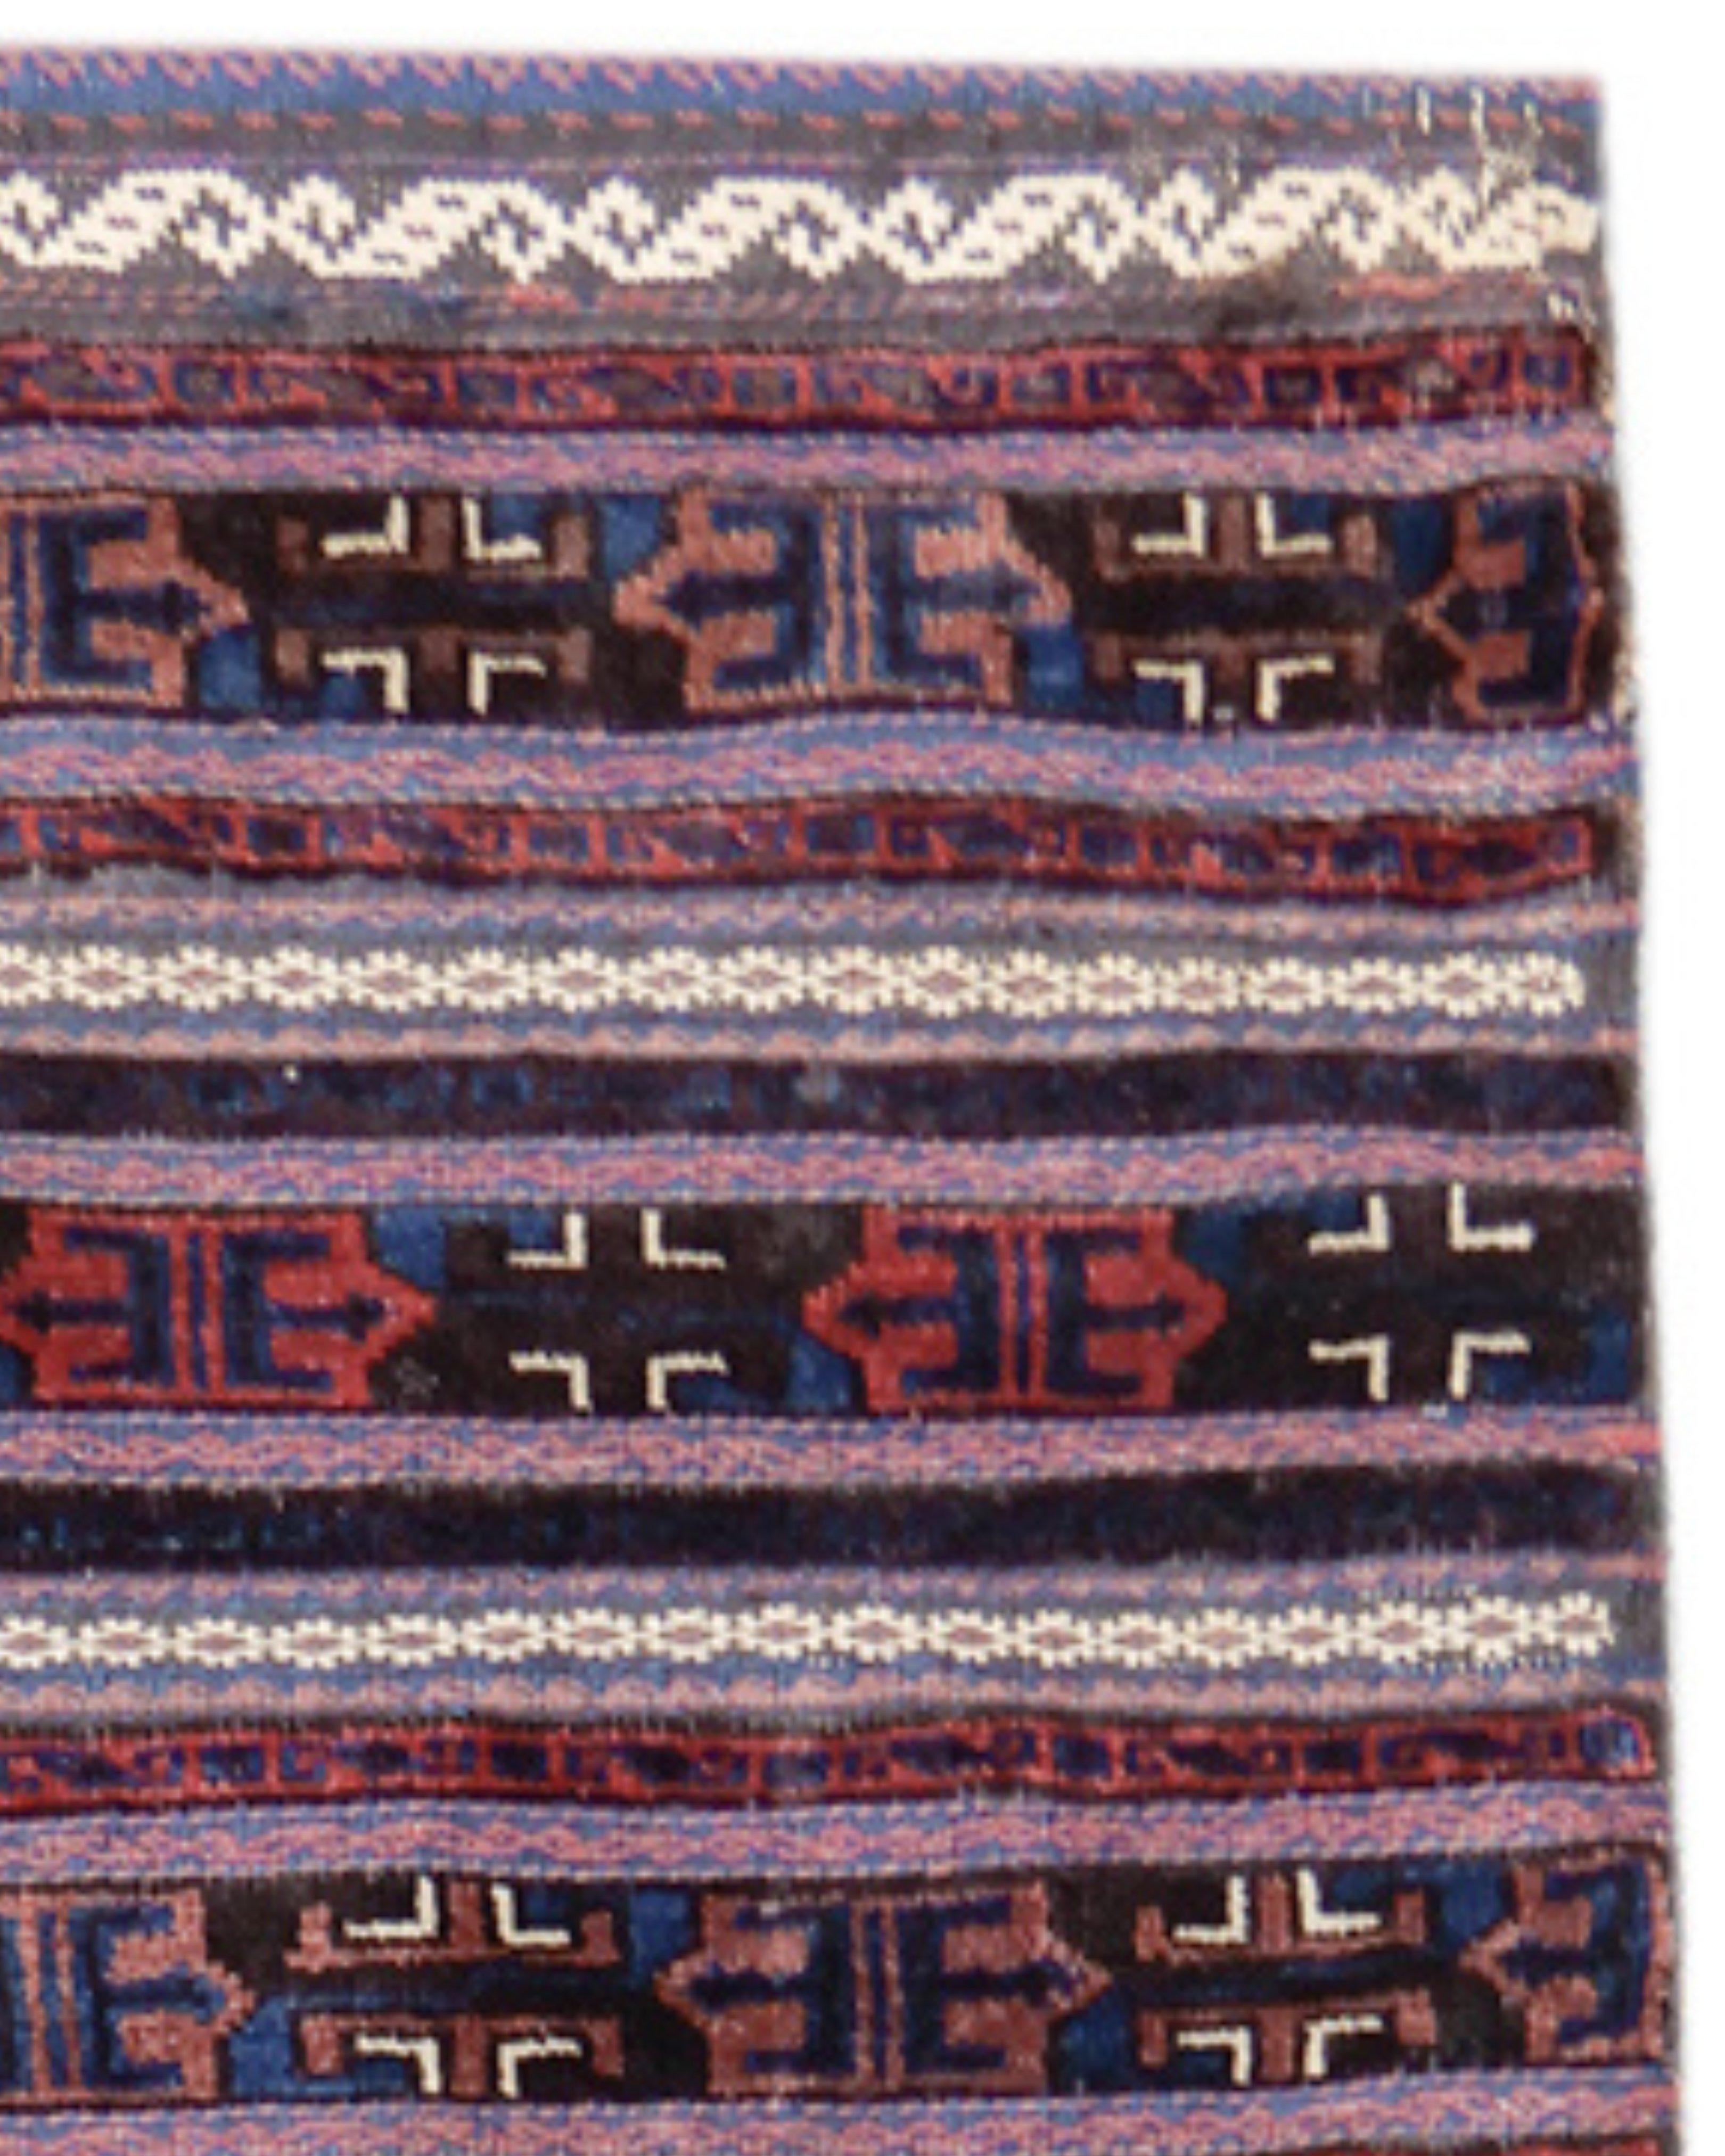 Baluch Khorjin Rug, Late 19th Century

Baluch pile weaving has been informed throughout its history by the traditions of neighboring groups. This complete double saddle bag set, or ‘khorjin,’ draws thin bands in alternating pile and flat weave in